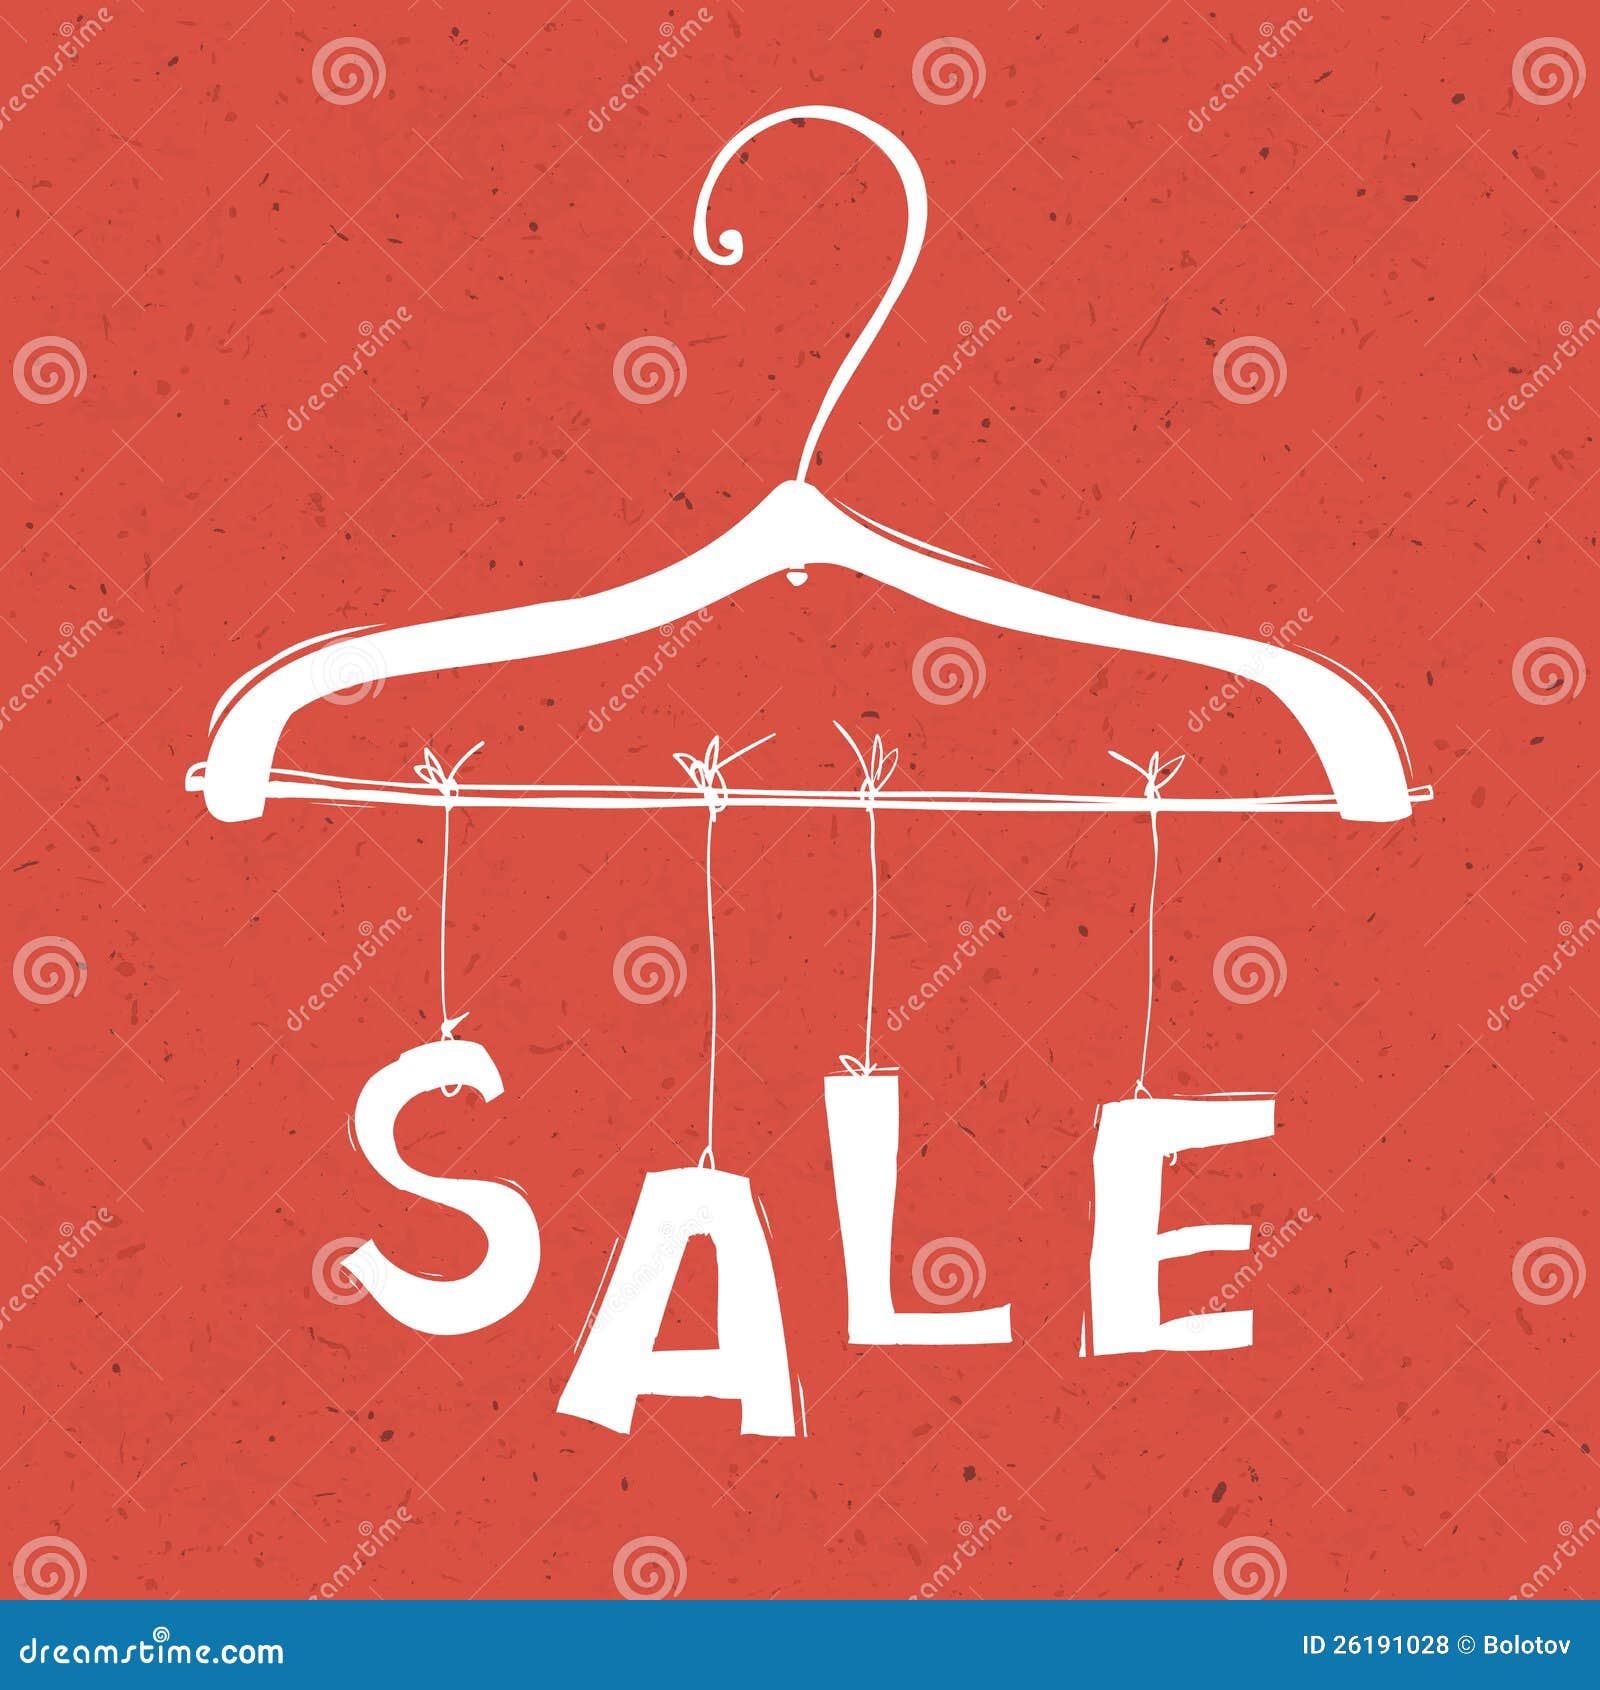 Sale concept stock vector. Illustration of apparel, casual - 26191028